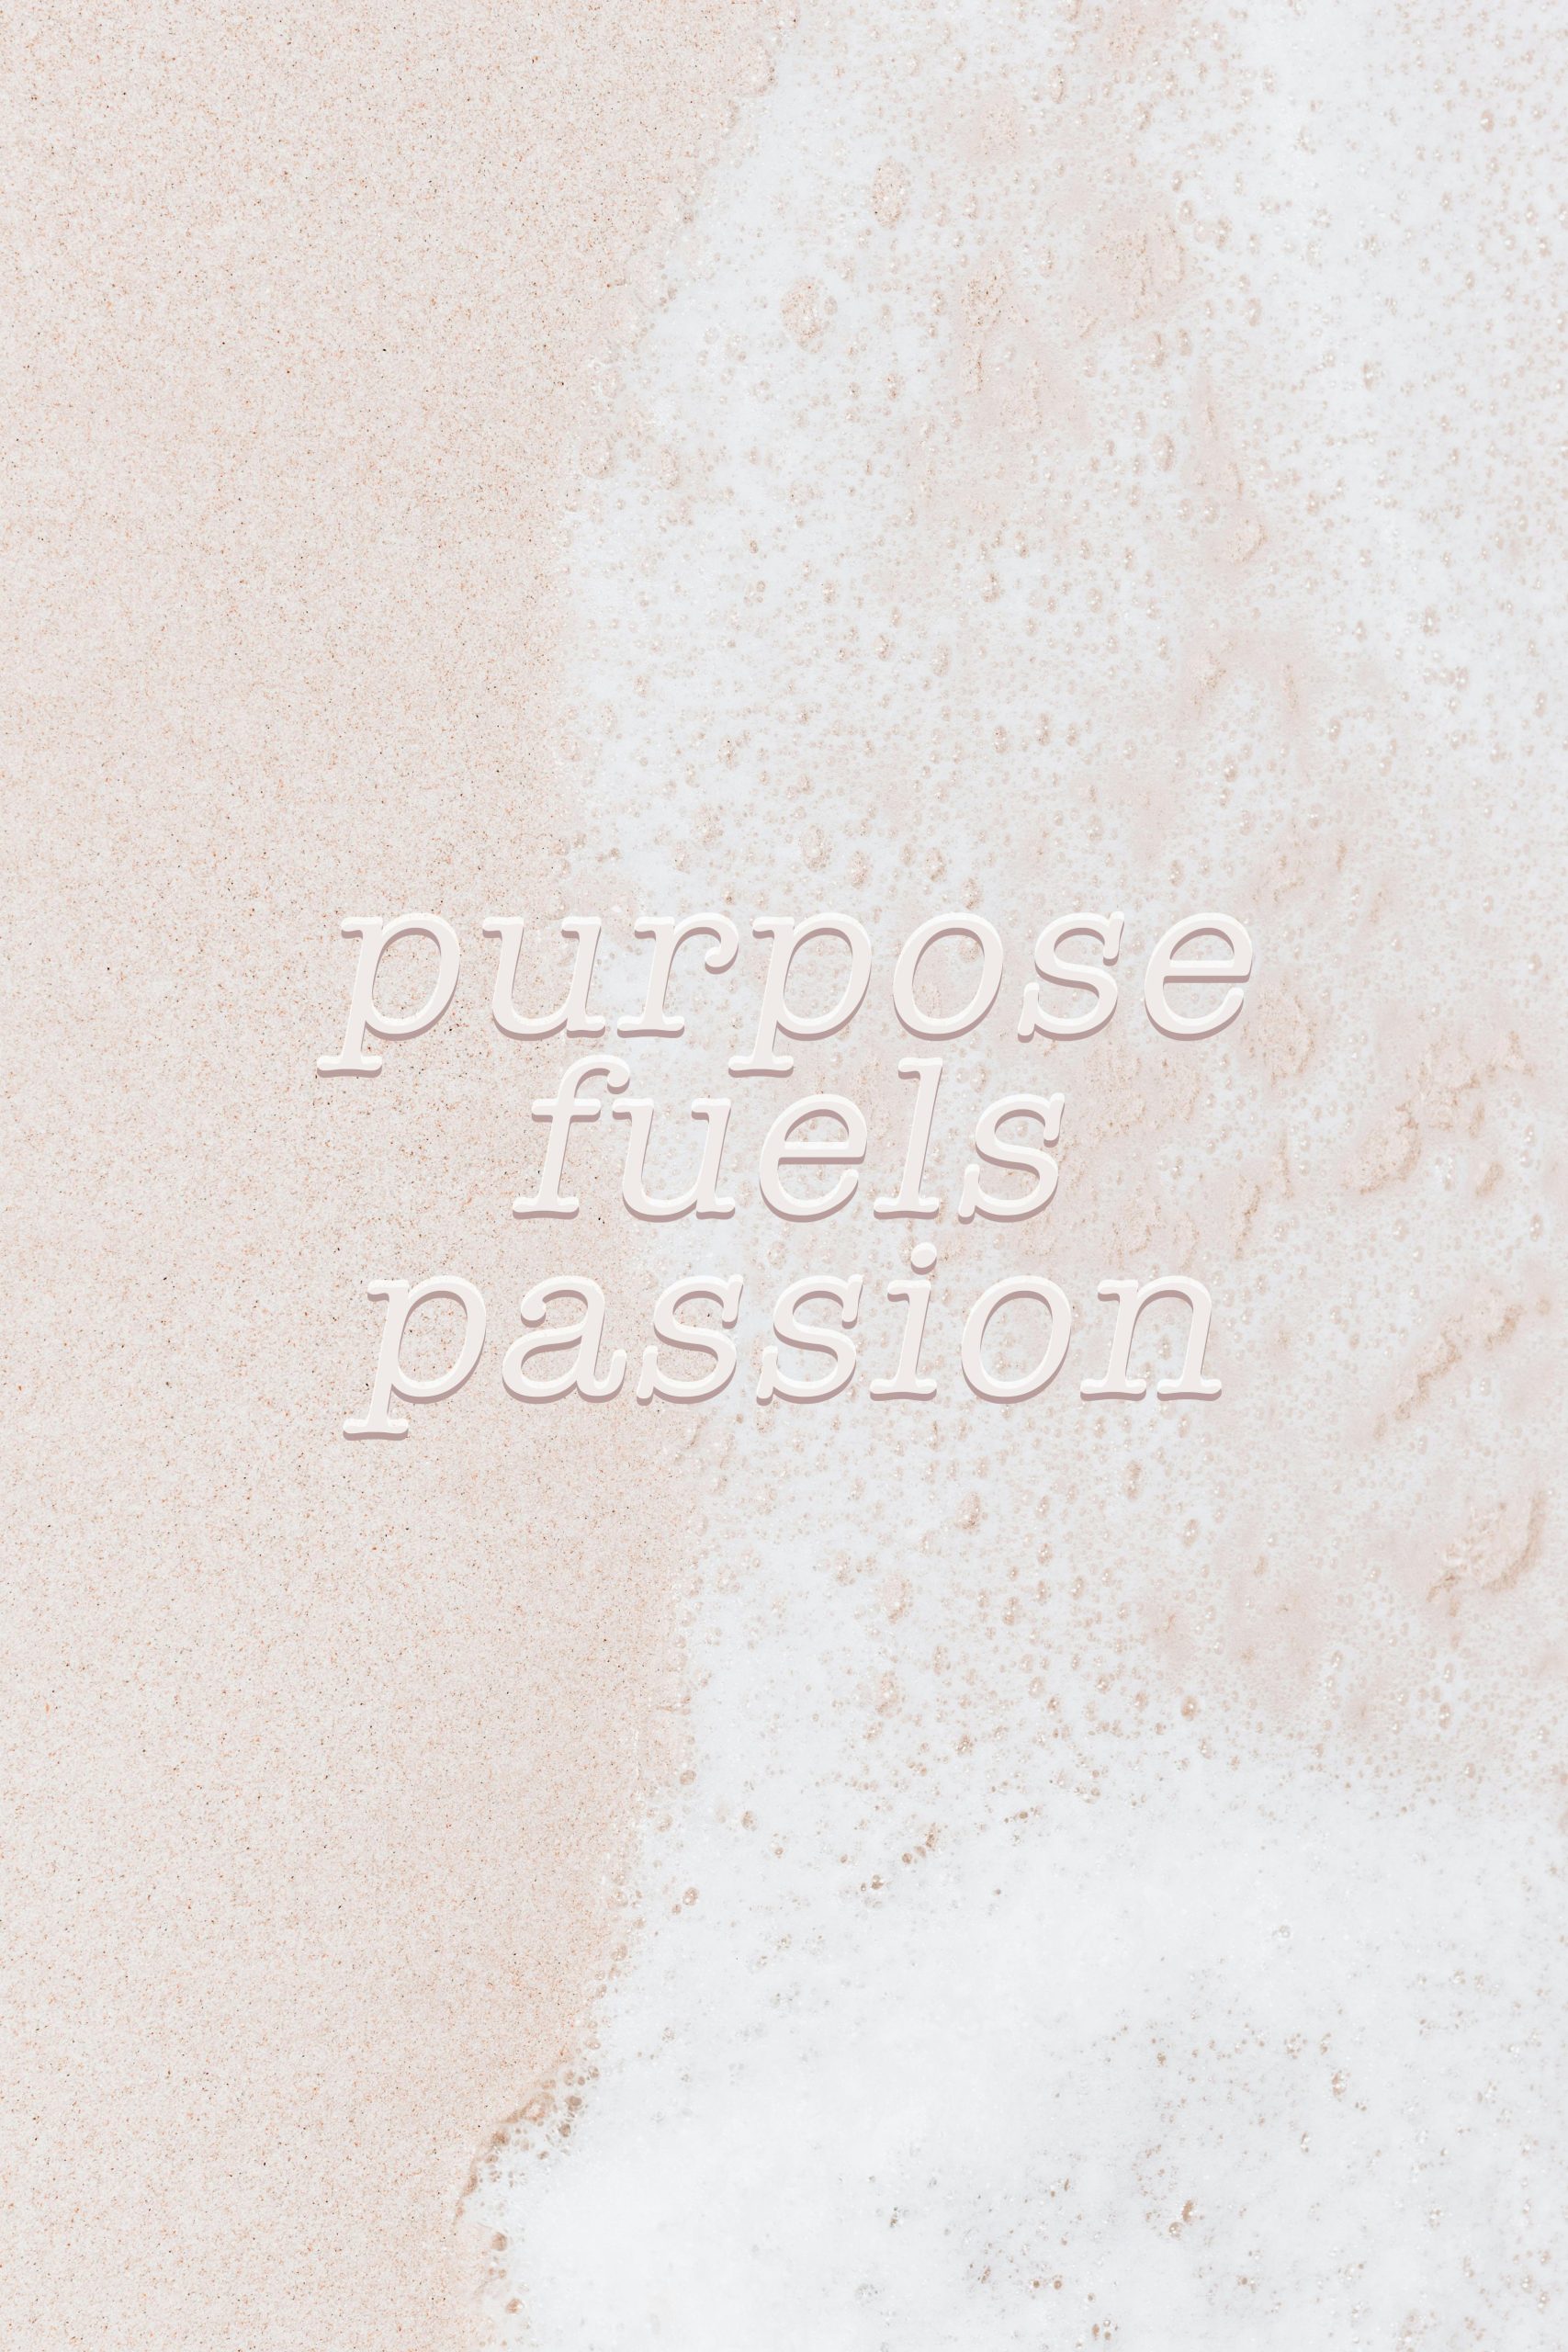 Pause, Reflect, Reimagine: What is my Blog’s Purpose?